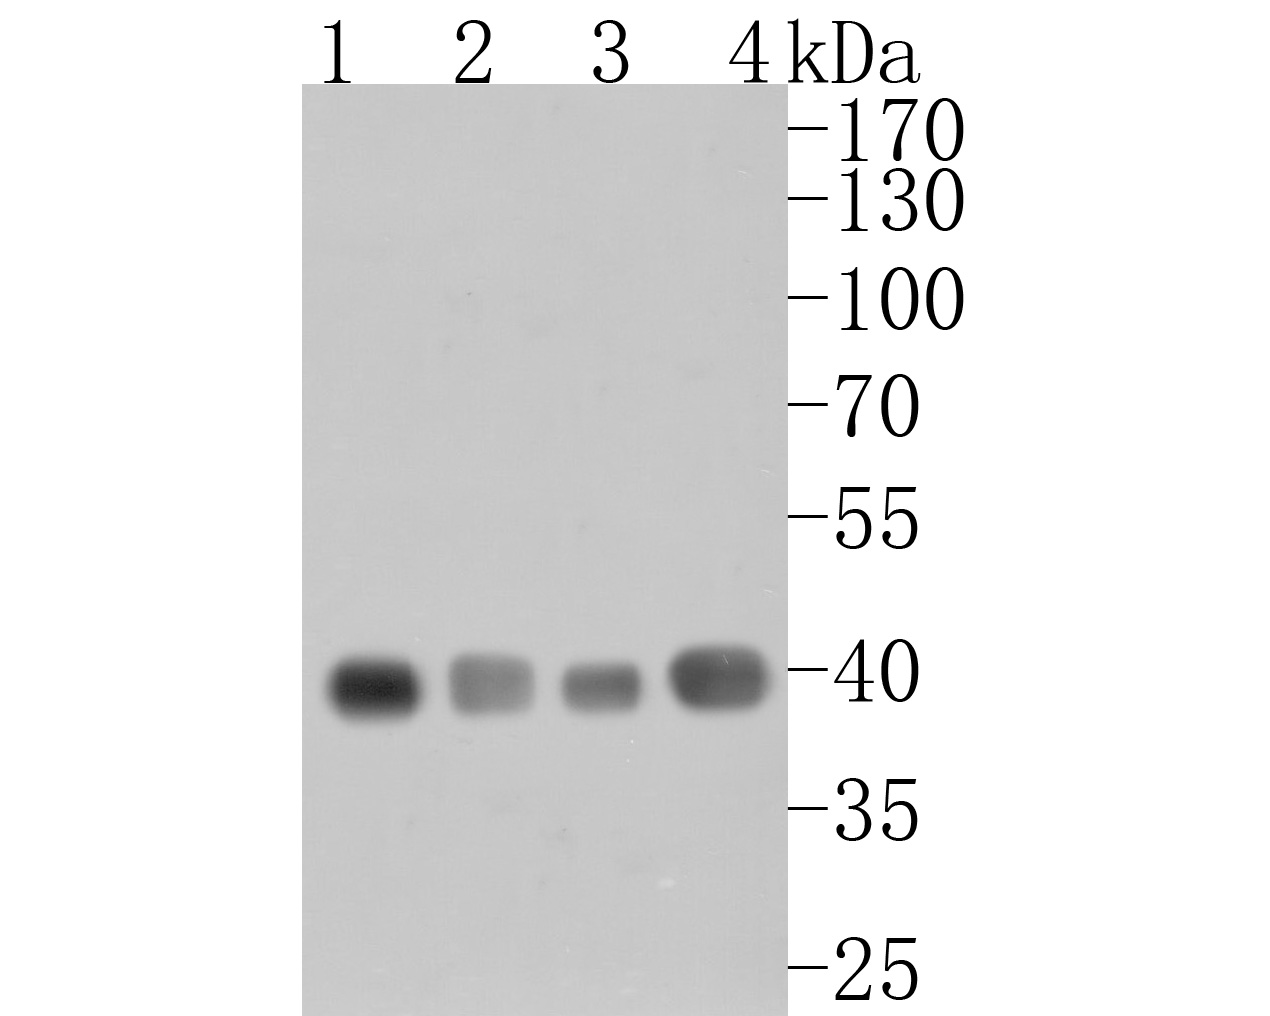 Western blot analysis of GNAO1 on different lysates. Proteins were transferred to a PVDF membrane and blocked with 5% BSA in PBS for 1 hour at room temperature. The primary antibody (HA500136, 1/5,000) was used in 5% BSA at room temperature for 2 hours. Goat Anti-Rabbit IgG - HRP Secondary Antibody (HA1001) at 1:200,000 dilution was used for 1 hour at room temperature.<br />
Positive control: <br />
Lane 1: Rat brain tissue lysate<br />
Lane 2: Mouse brain tissue lysate<br />
Lane 3: Mouse hippocampus tissue lysate<br />
Lane 4: Human brain tissue lysate